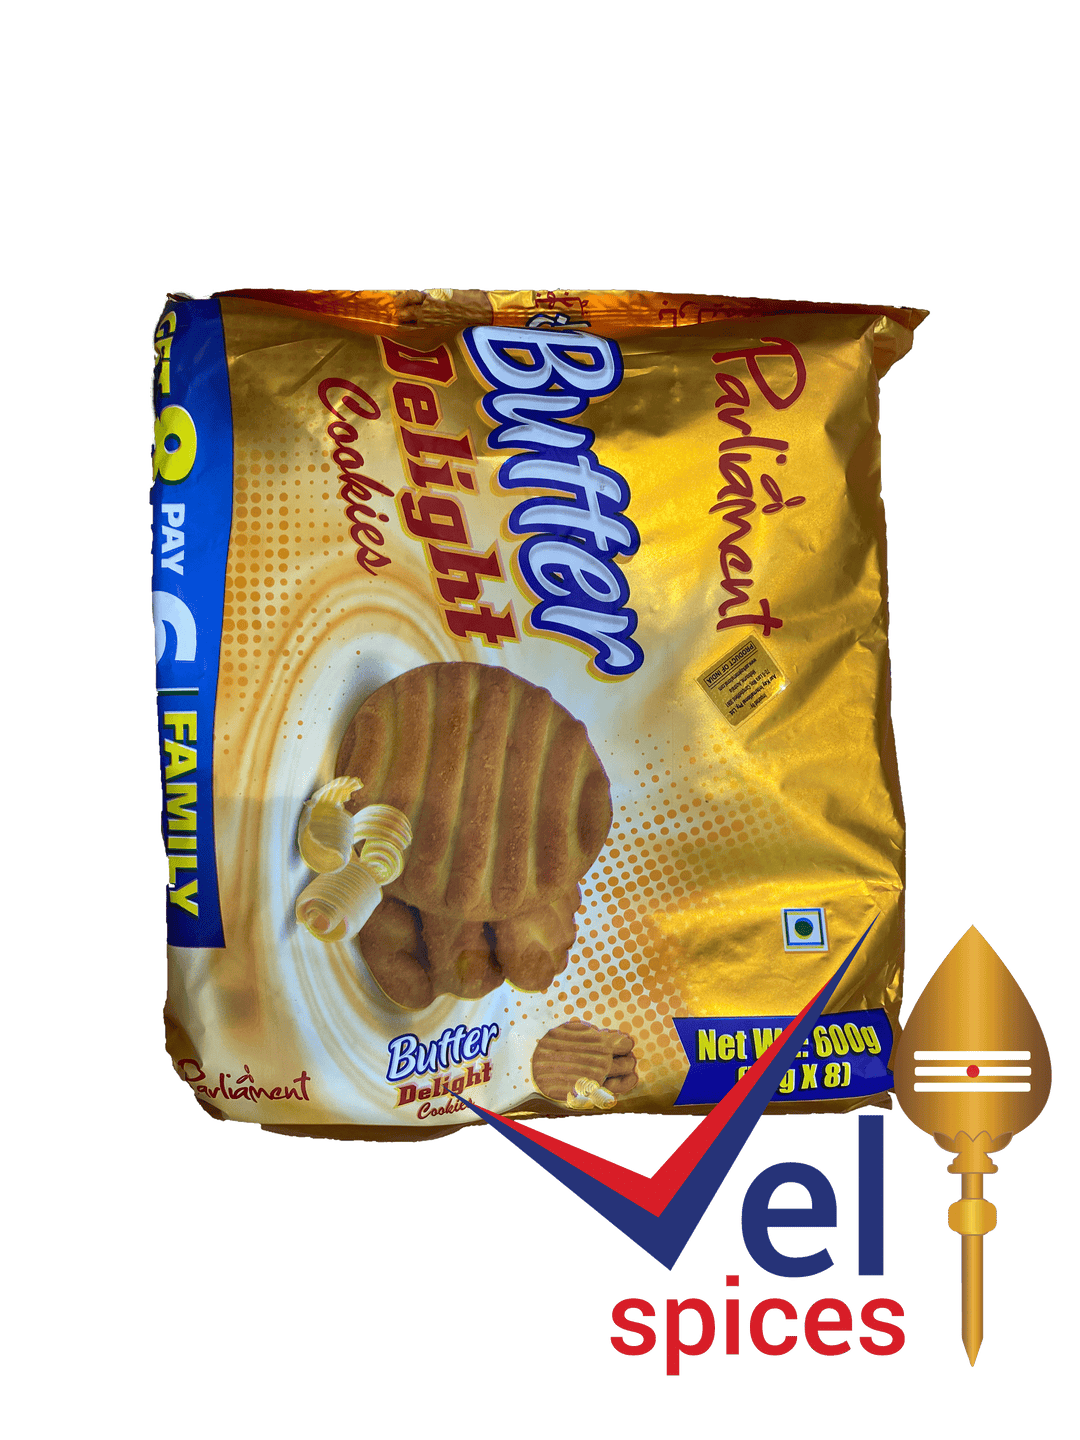 Parliament Butter Delight Cookies Value Pack 600G